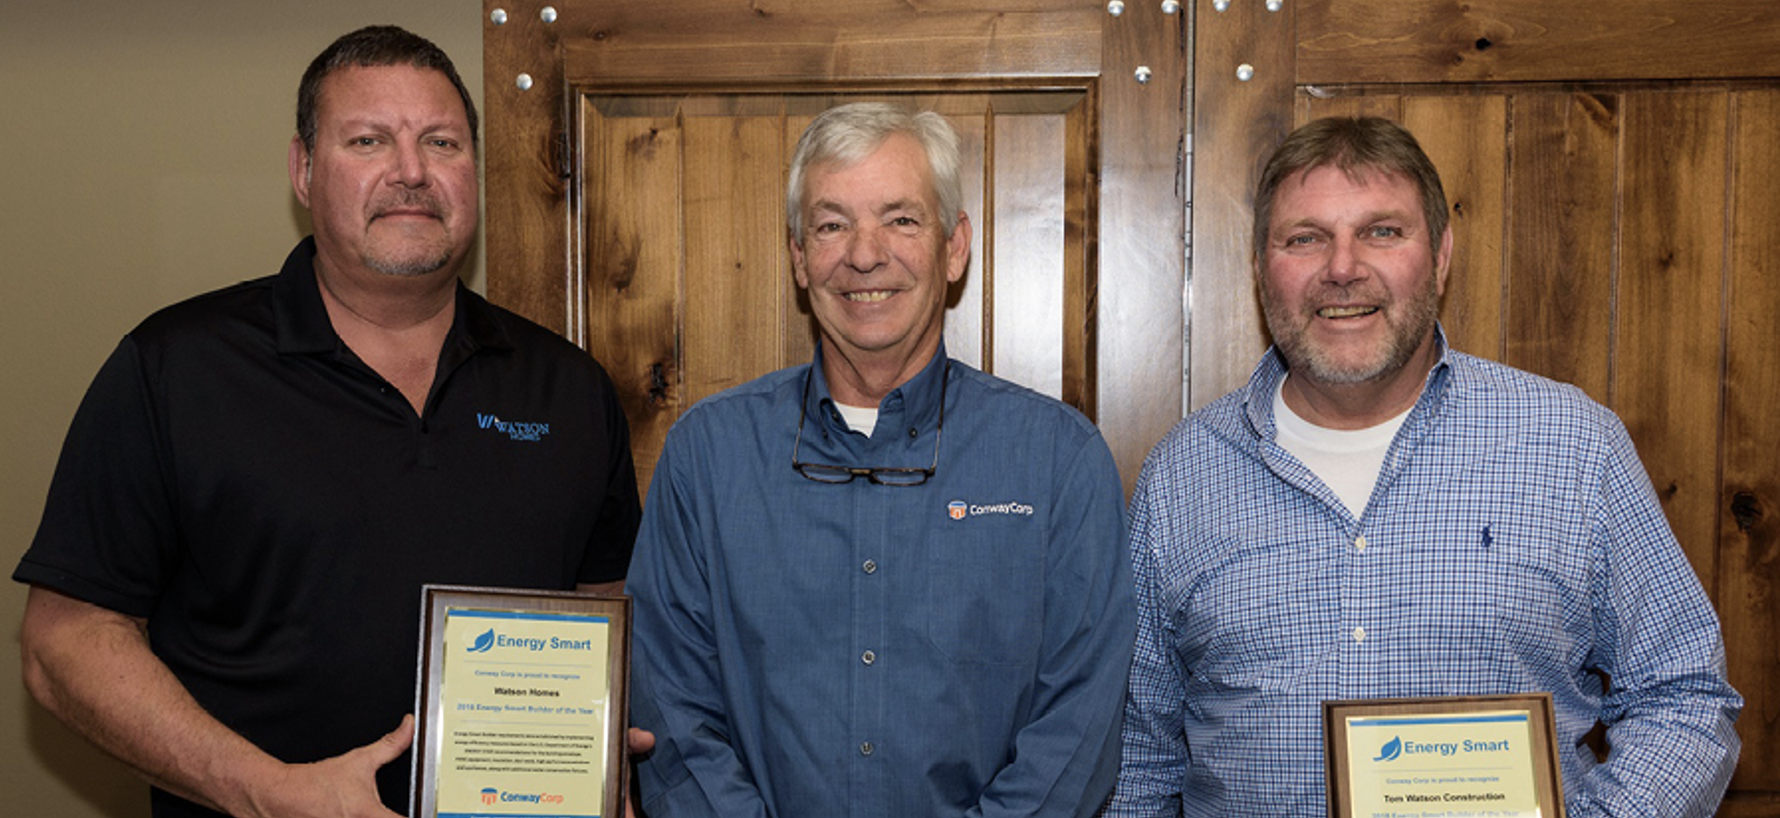 Conway Corp announces 2018 Energy Smart Builder of the Year